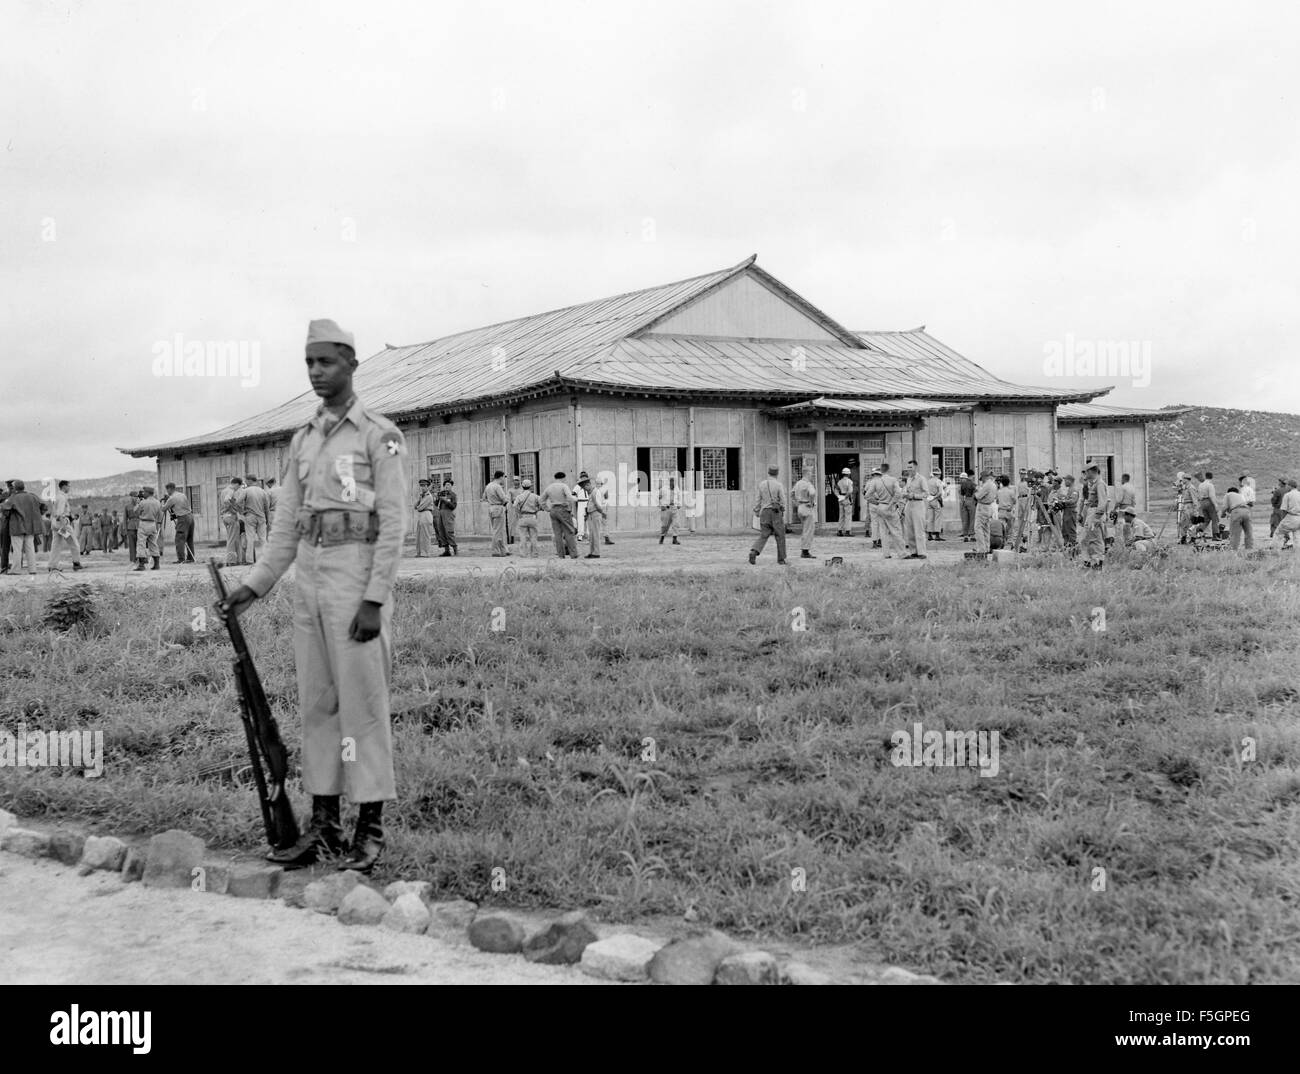 KOREAN WAR ARMISTICE  signed at Panmunjon 27 July 1953. An Ethiopian soldier stands guard outside the Peace Pavilion where the signing is taking place. Photo: US Pacific Combat Camera group. Stock Photo